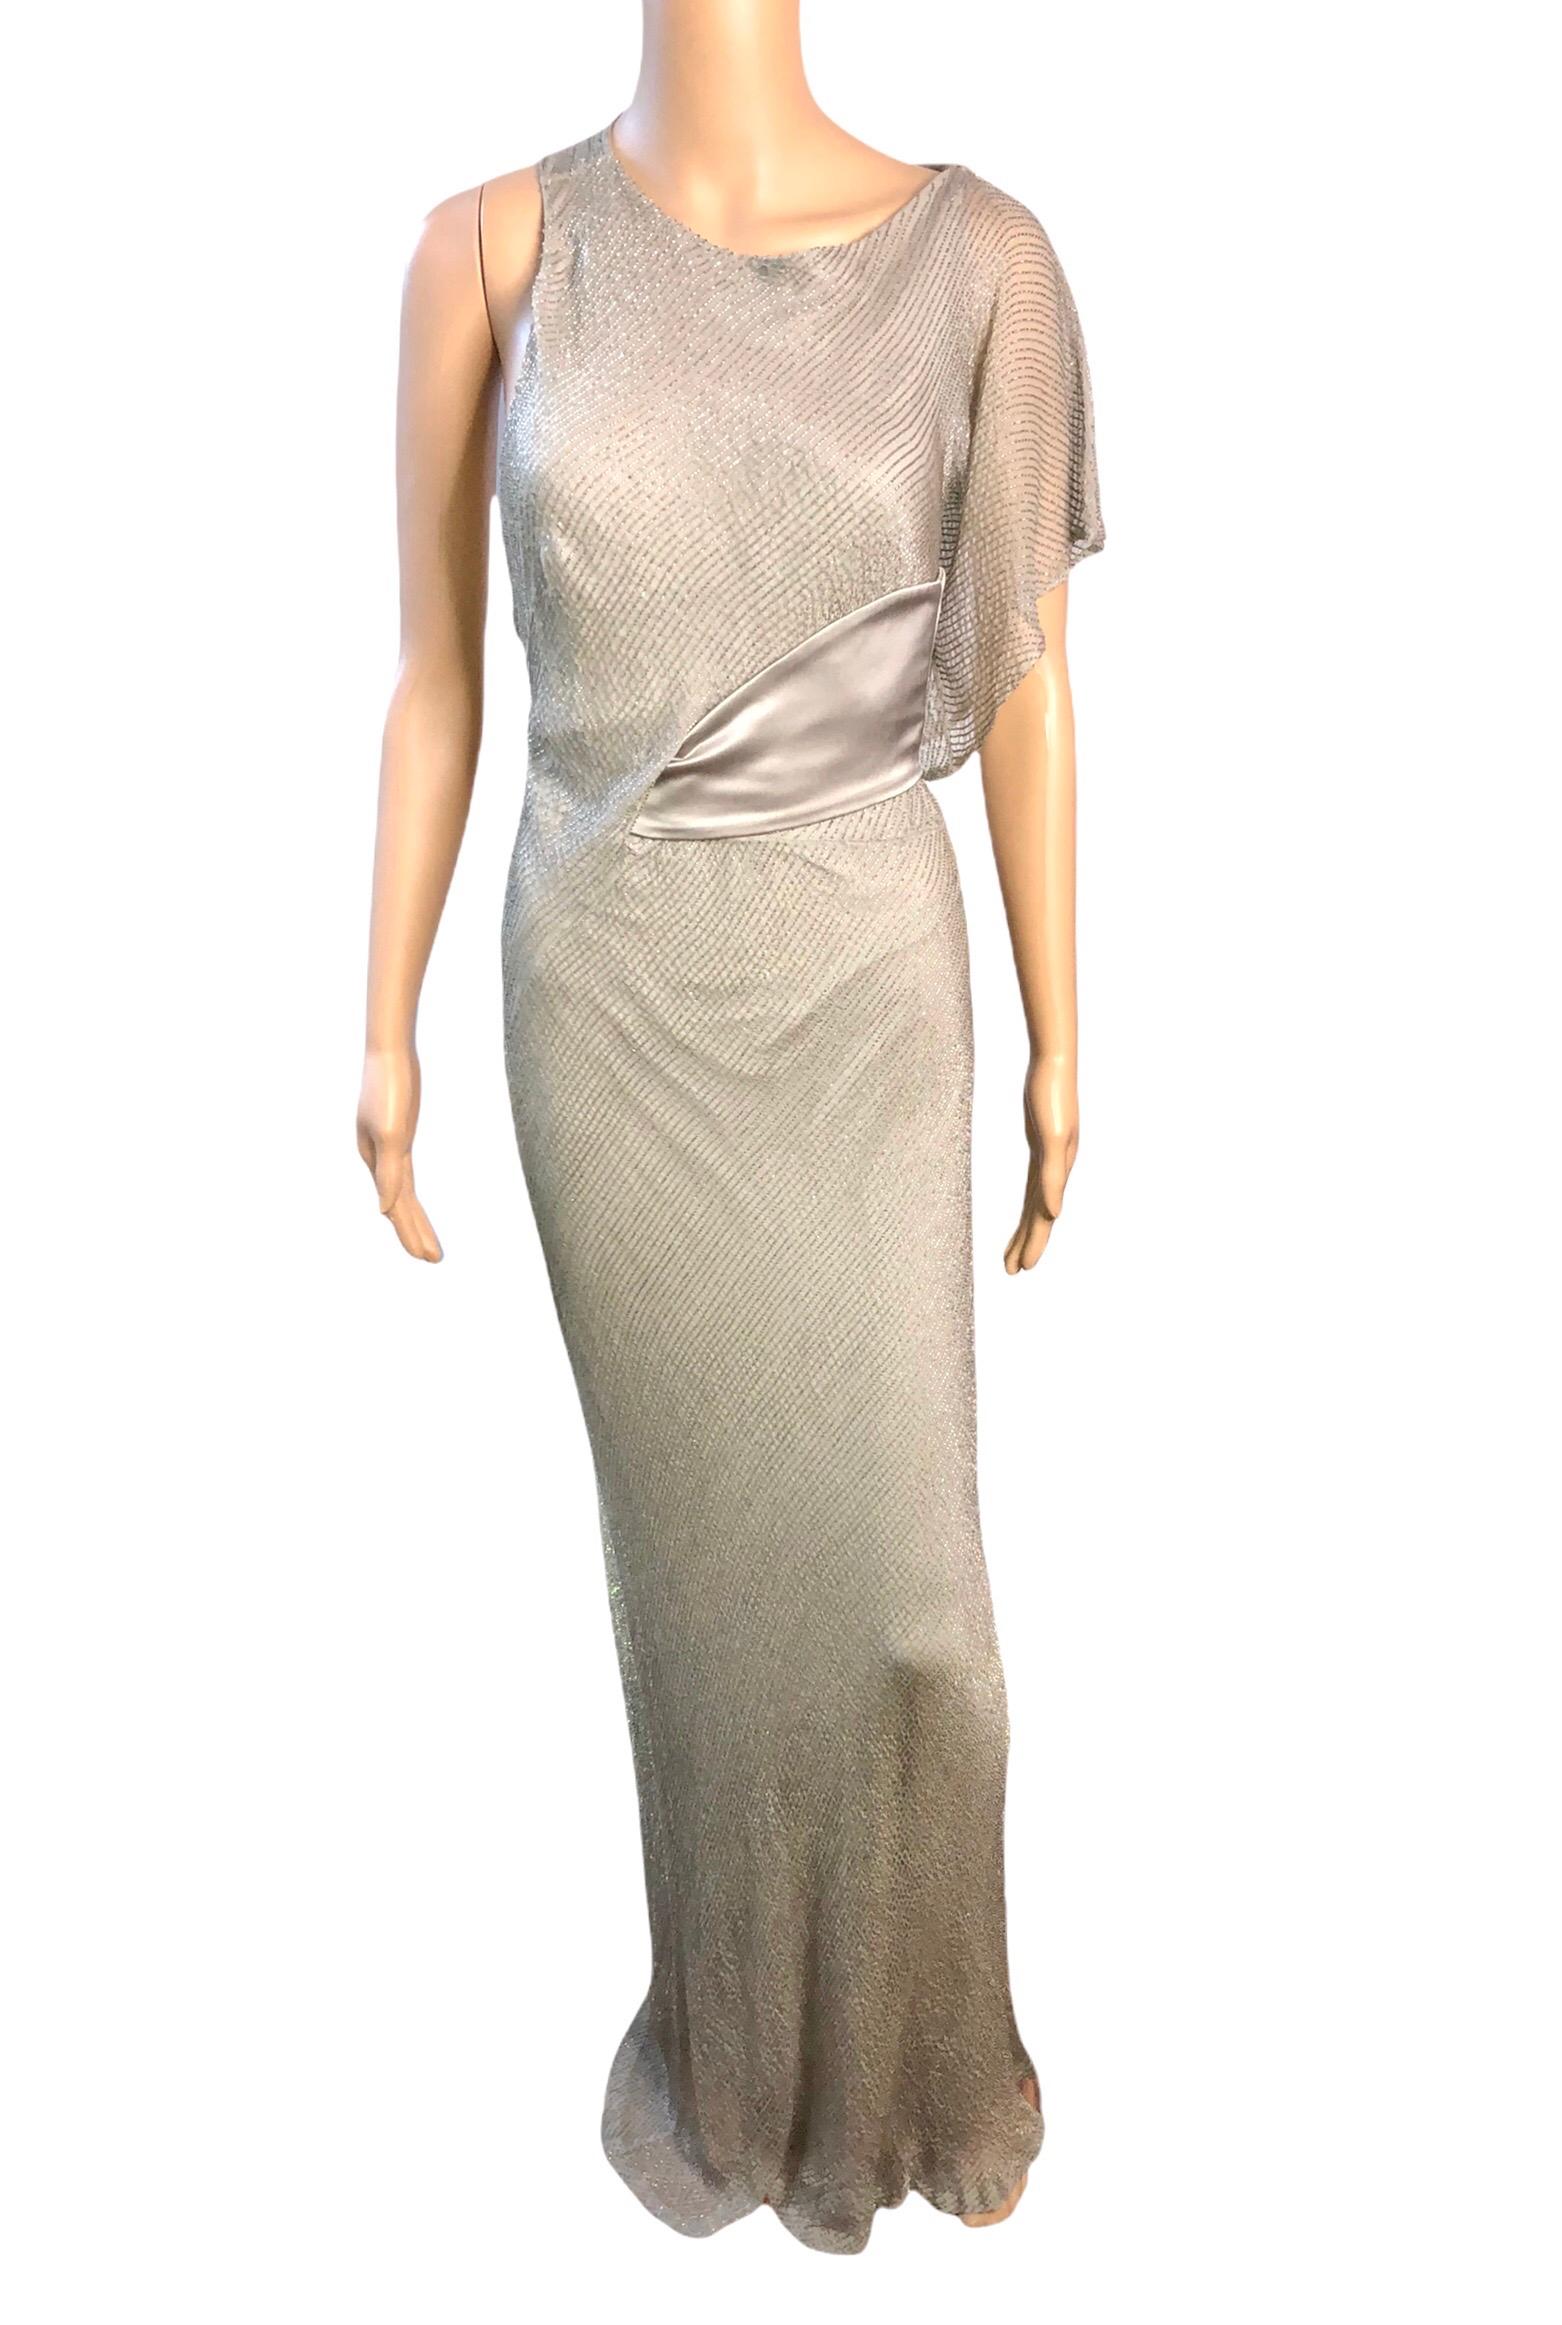 Versace F/W 2009 Runway Embellished Cutout Belted Silk Evening Dress Gown  In Good Condition For Sale In Naples, FL